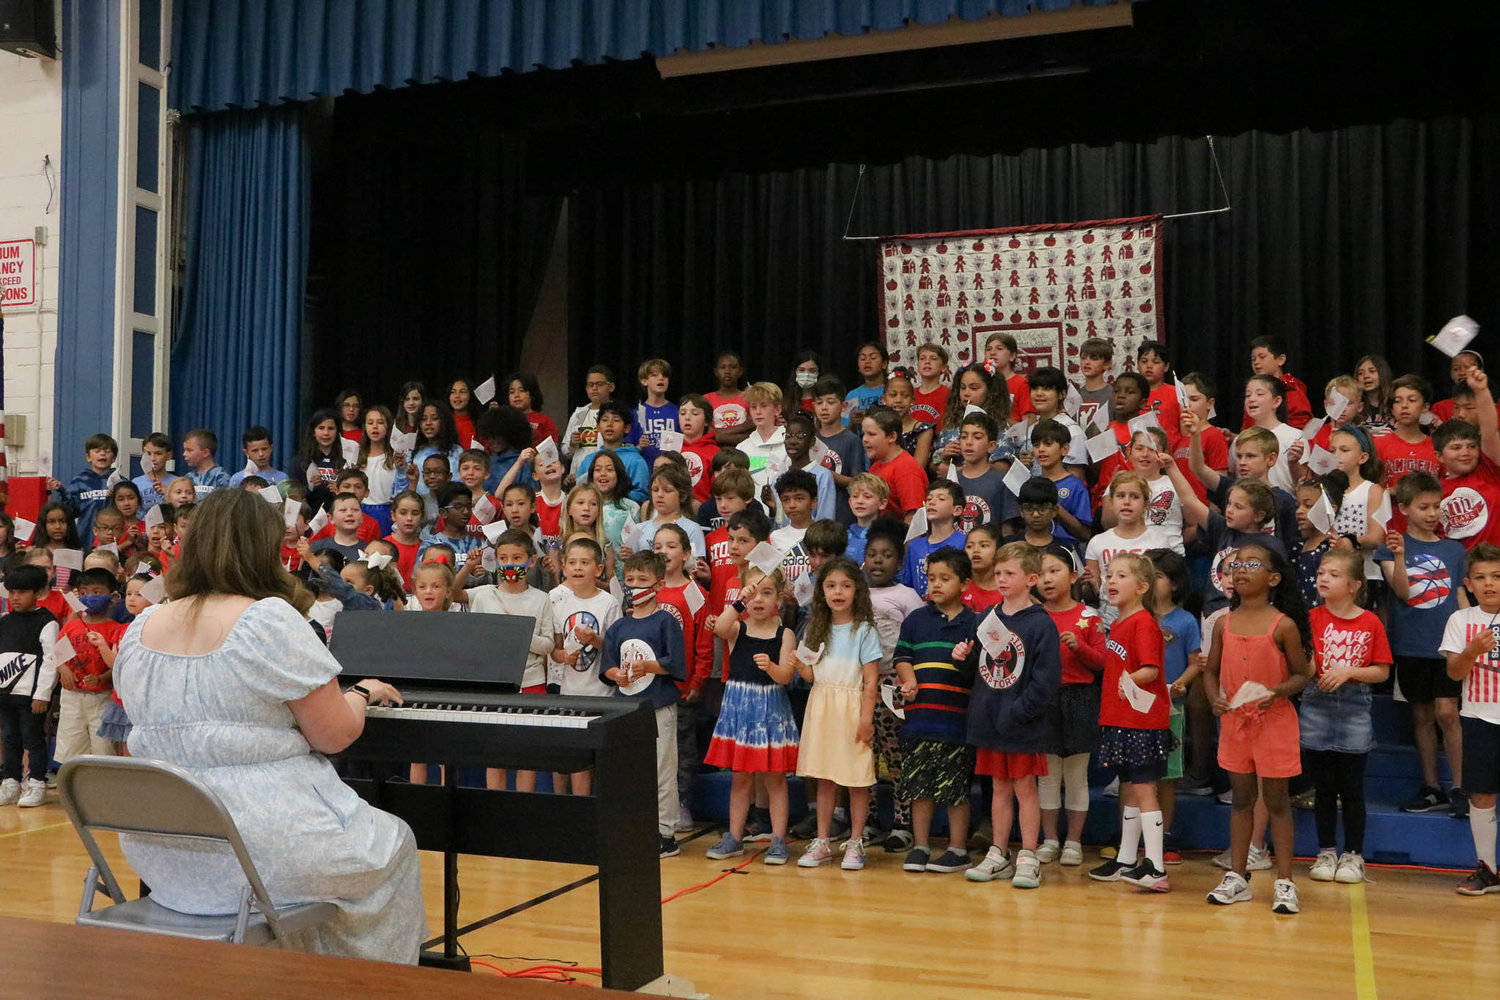 RIverside students sing "You're a Grand, Old Flag."